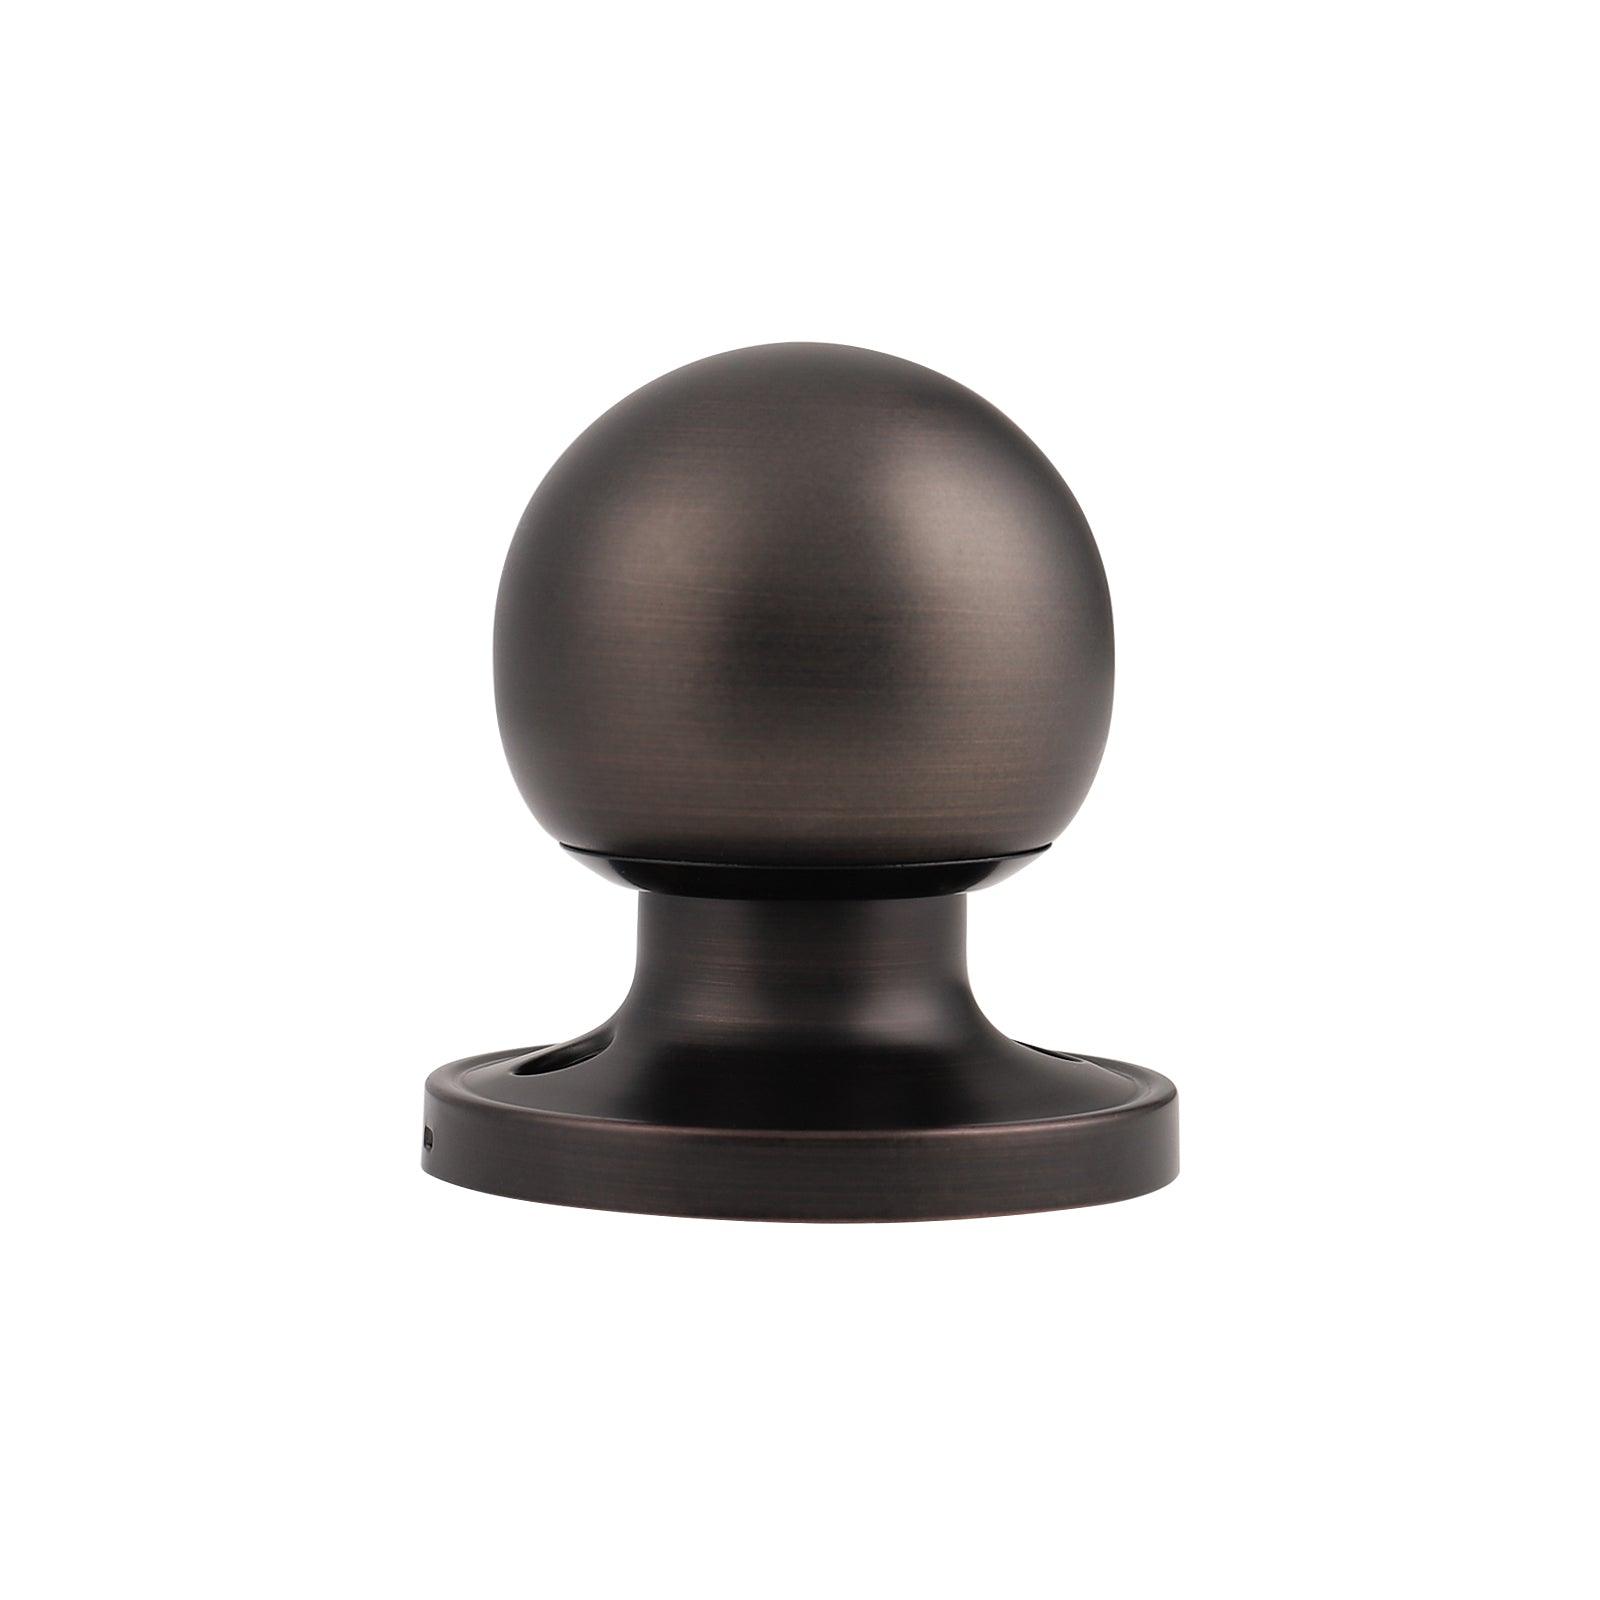 Round Ball Knobs Entrance Privacy Passage Dummy Door Lock Knob, Oil Rubbed Bronze Finish DL607ORB